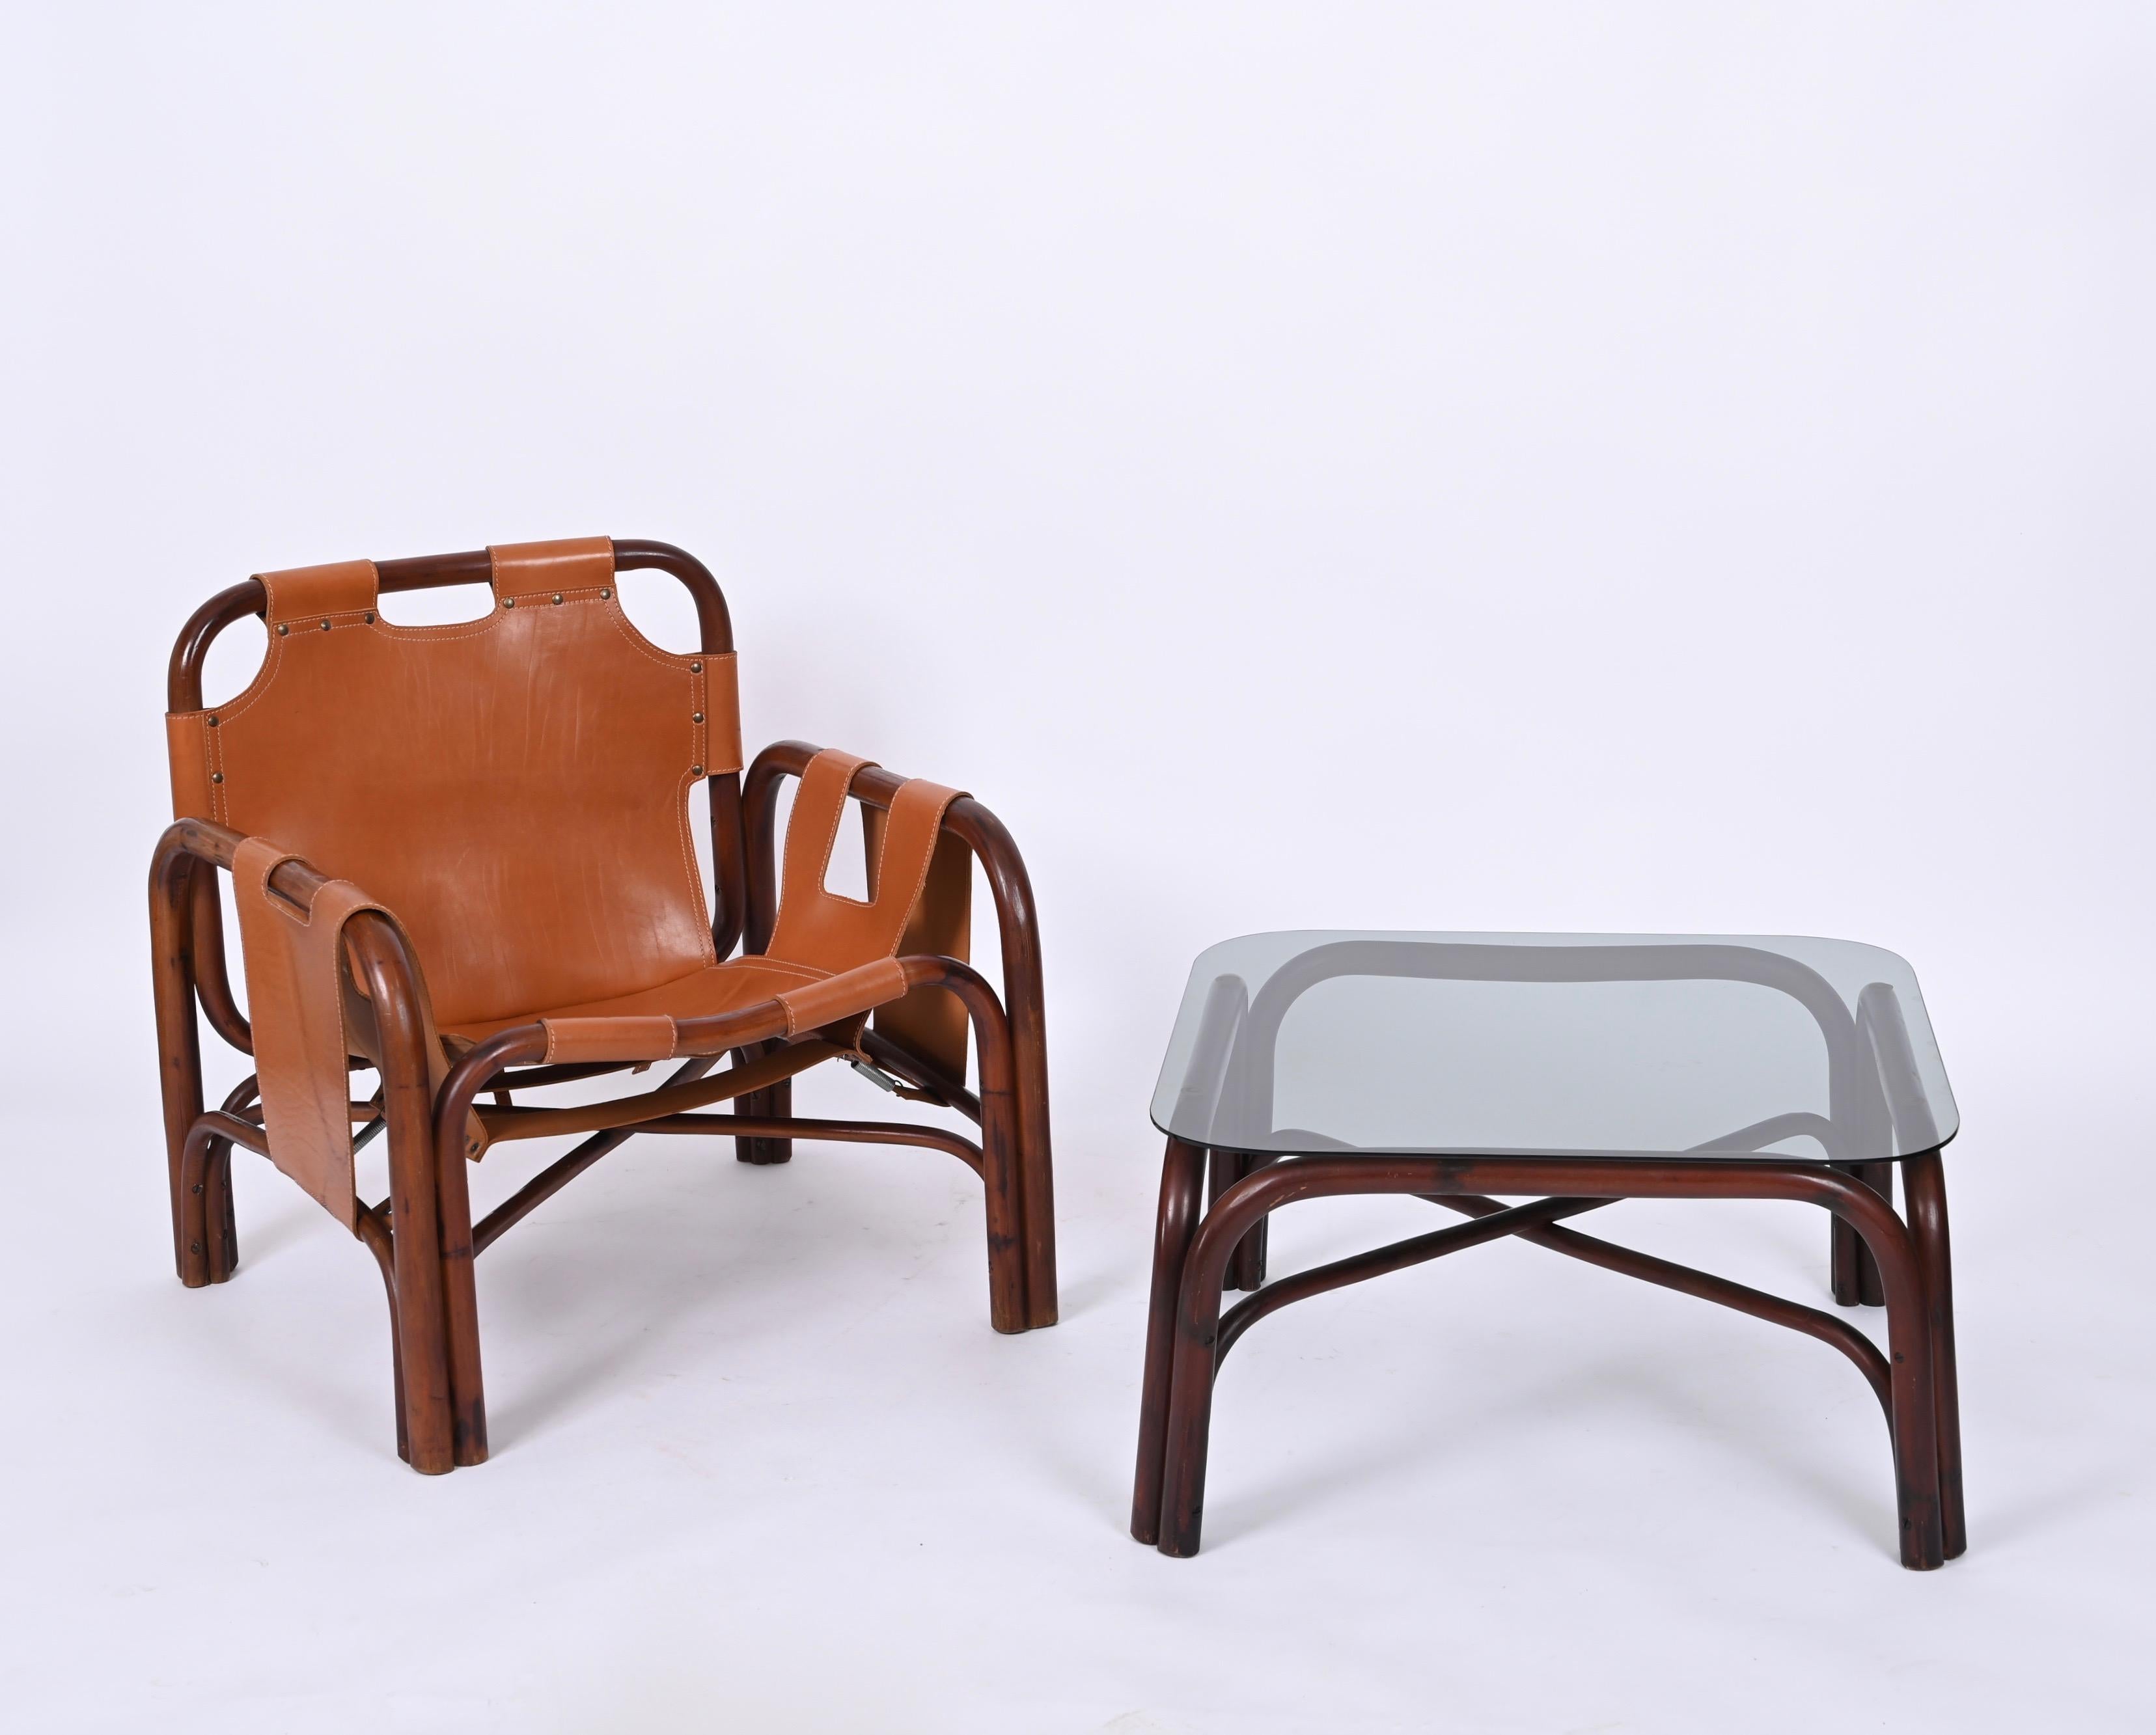 Set of Midcentury Pair of Bamboo and Leather Italian Armchairs and Table, 1960s For Sale 9